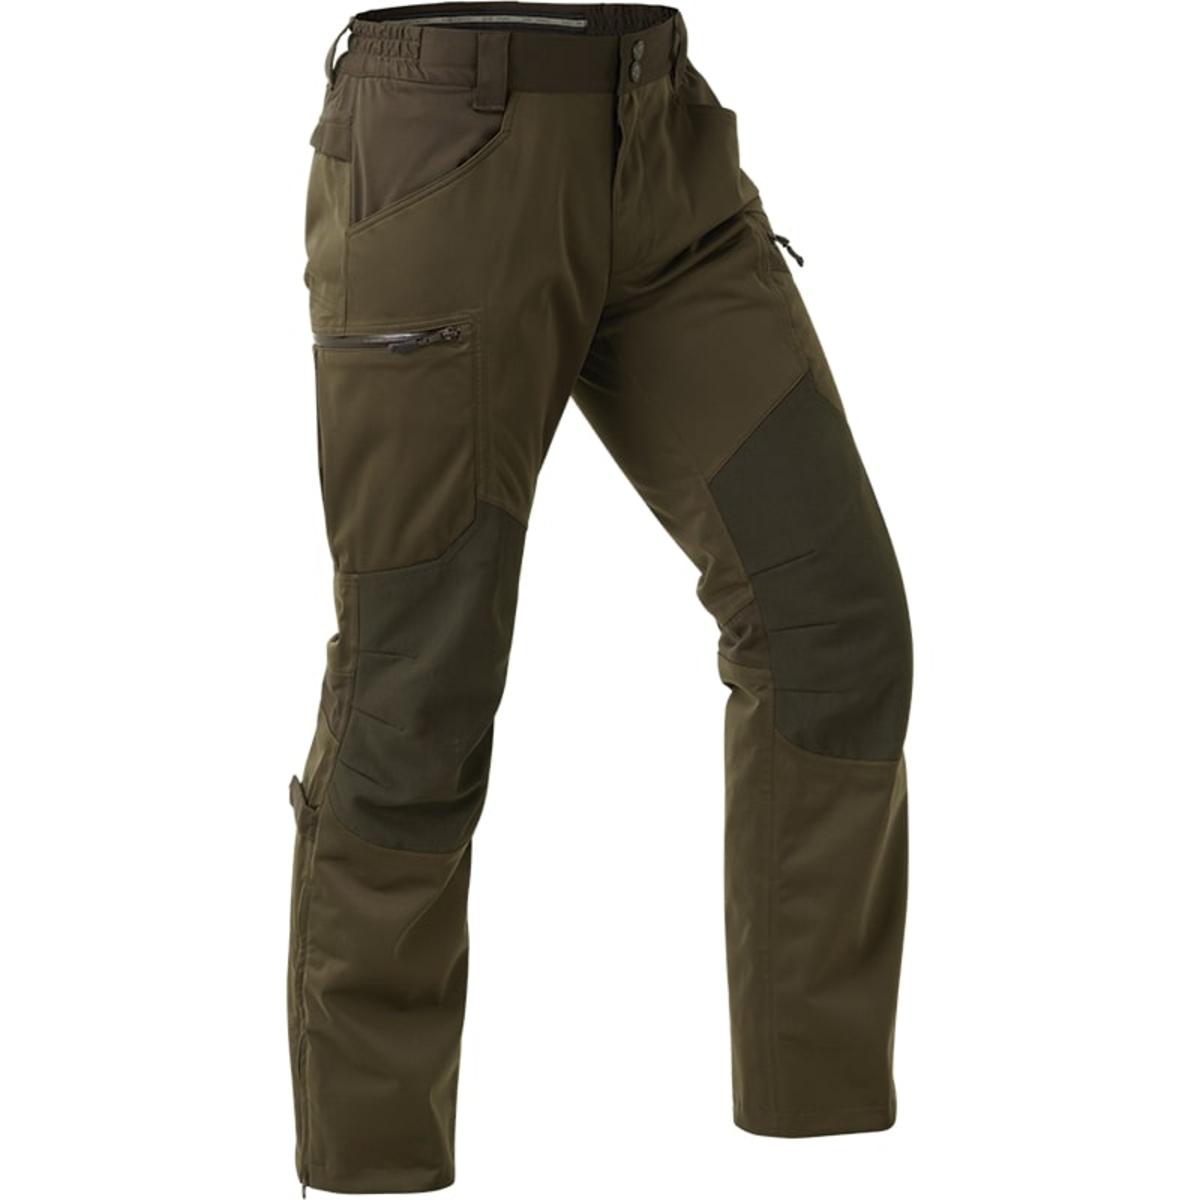 Sherwood Forest Kingswood Trousers Men039s Hunting SALE RRP 8999 LESS  12 PRICE  eBay